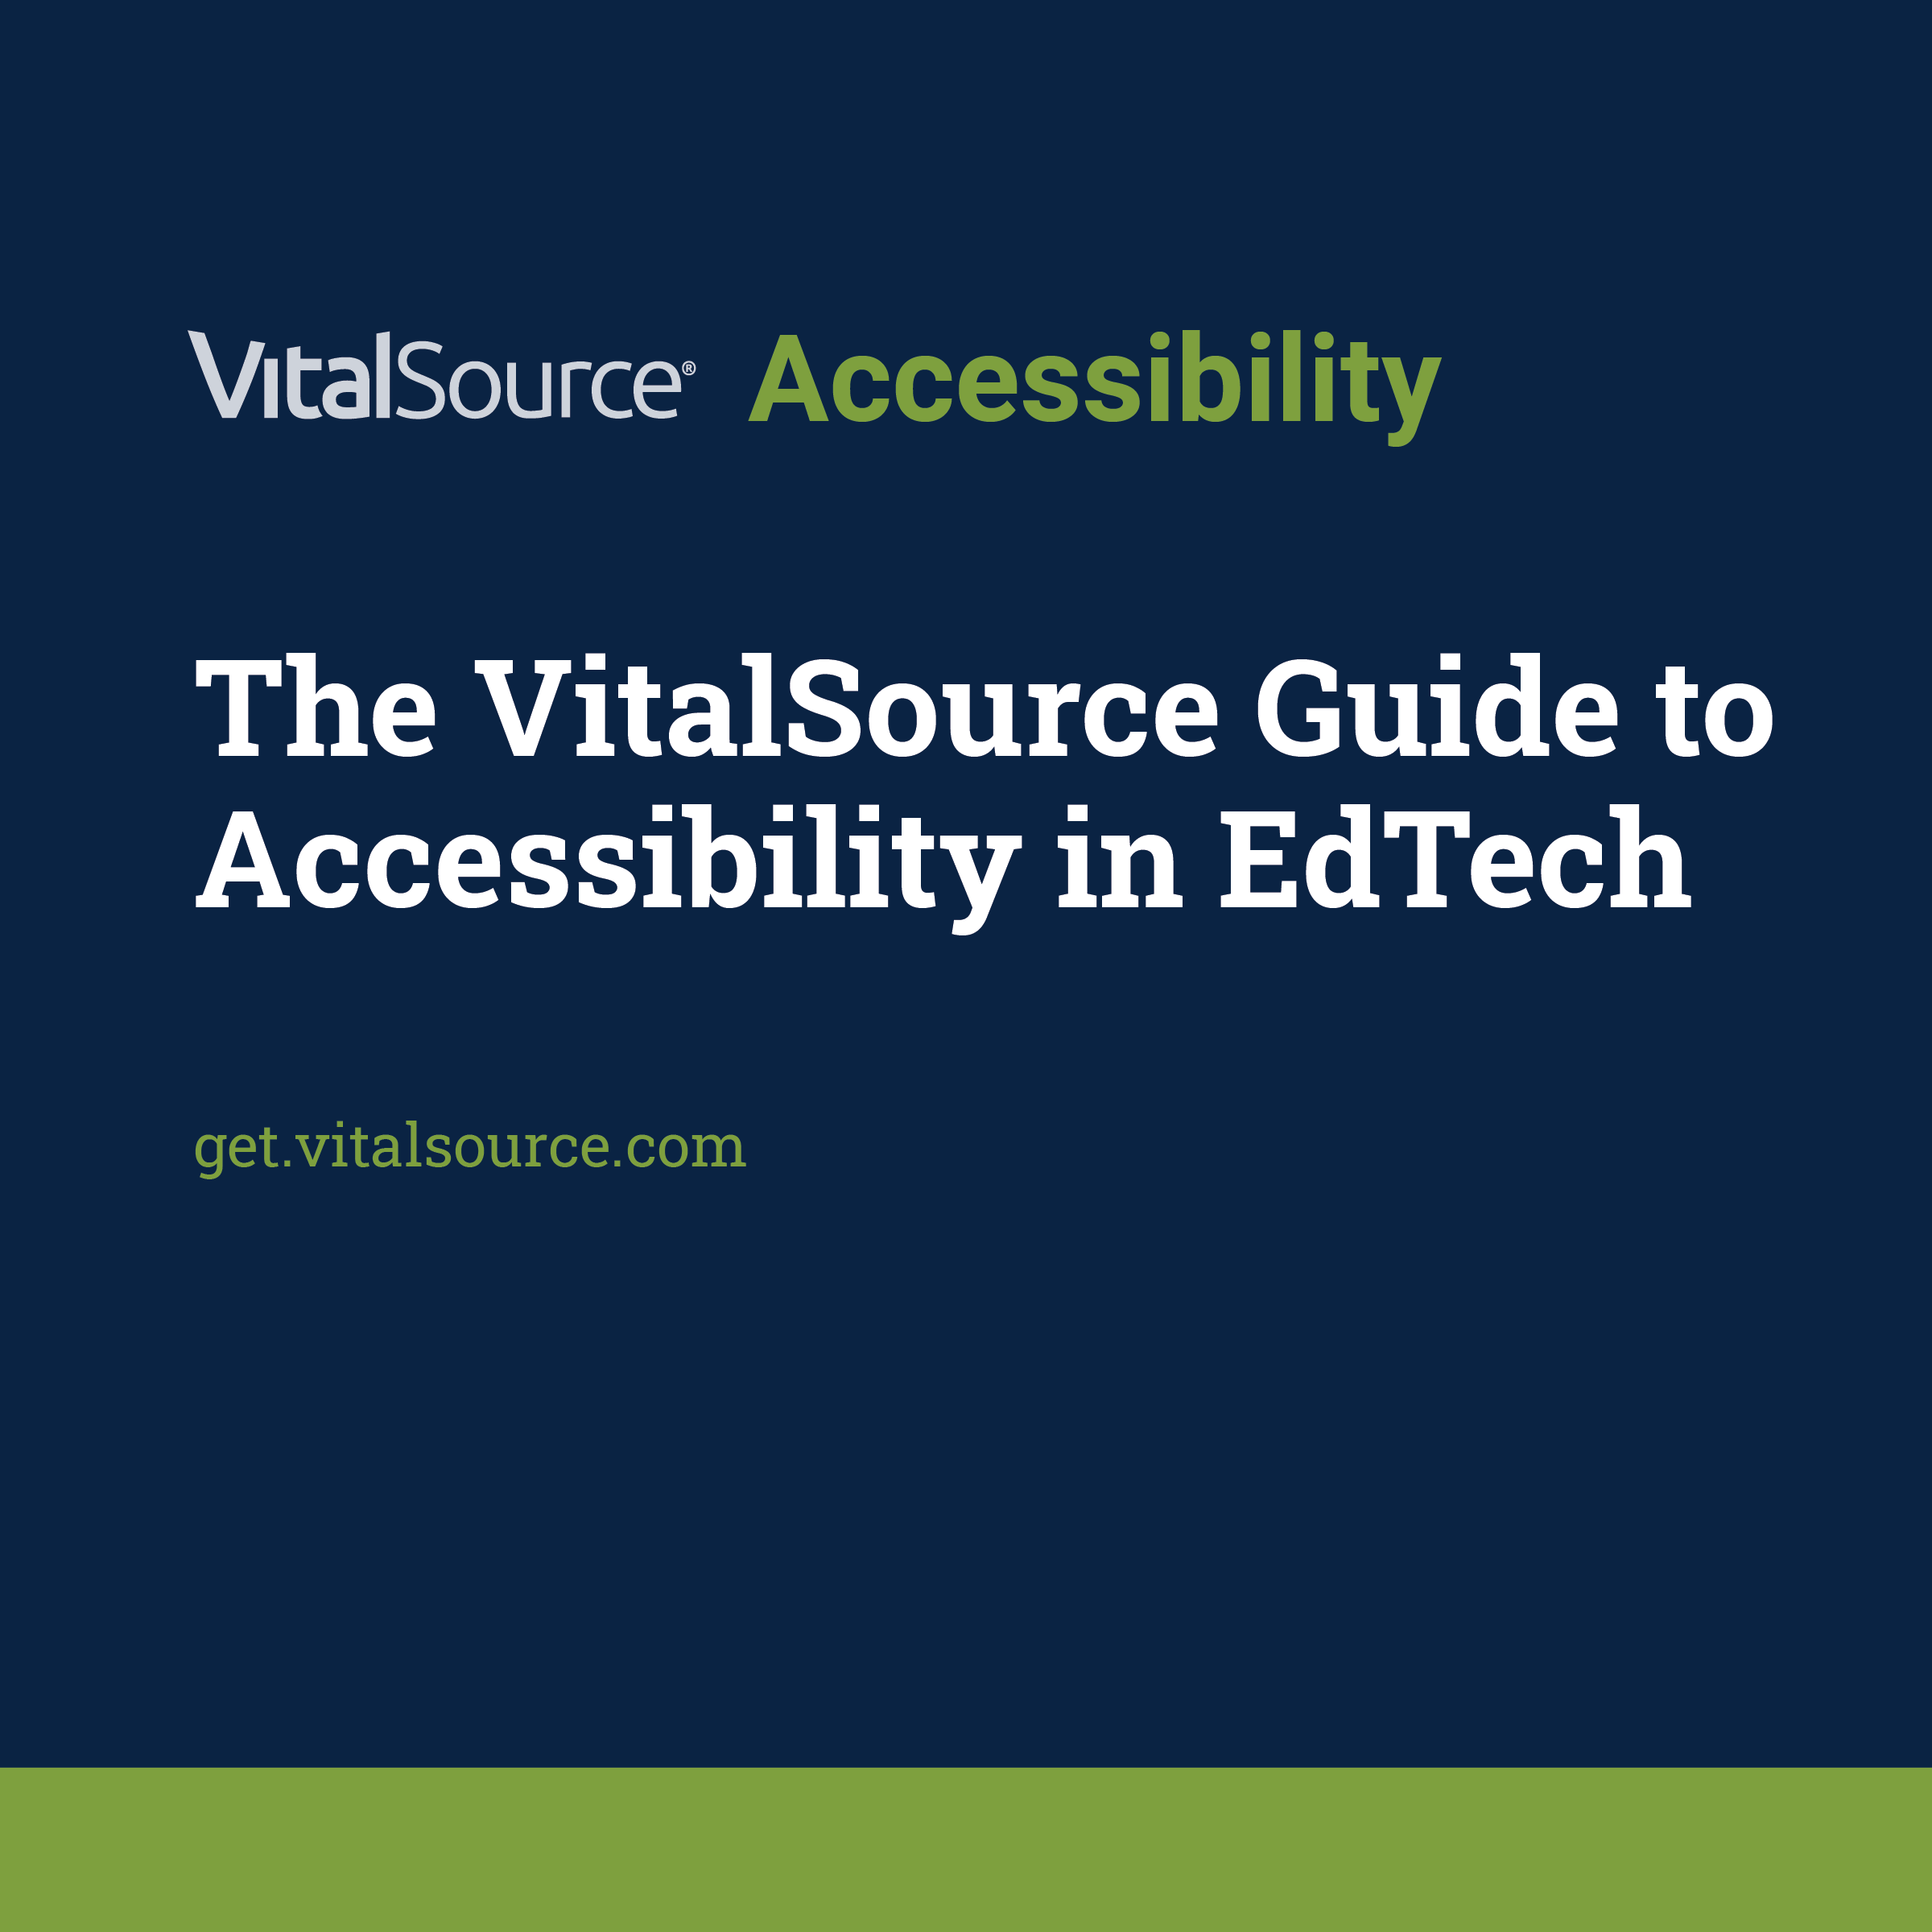 The Vitalsource Guide to Accessability in EdTech